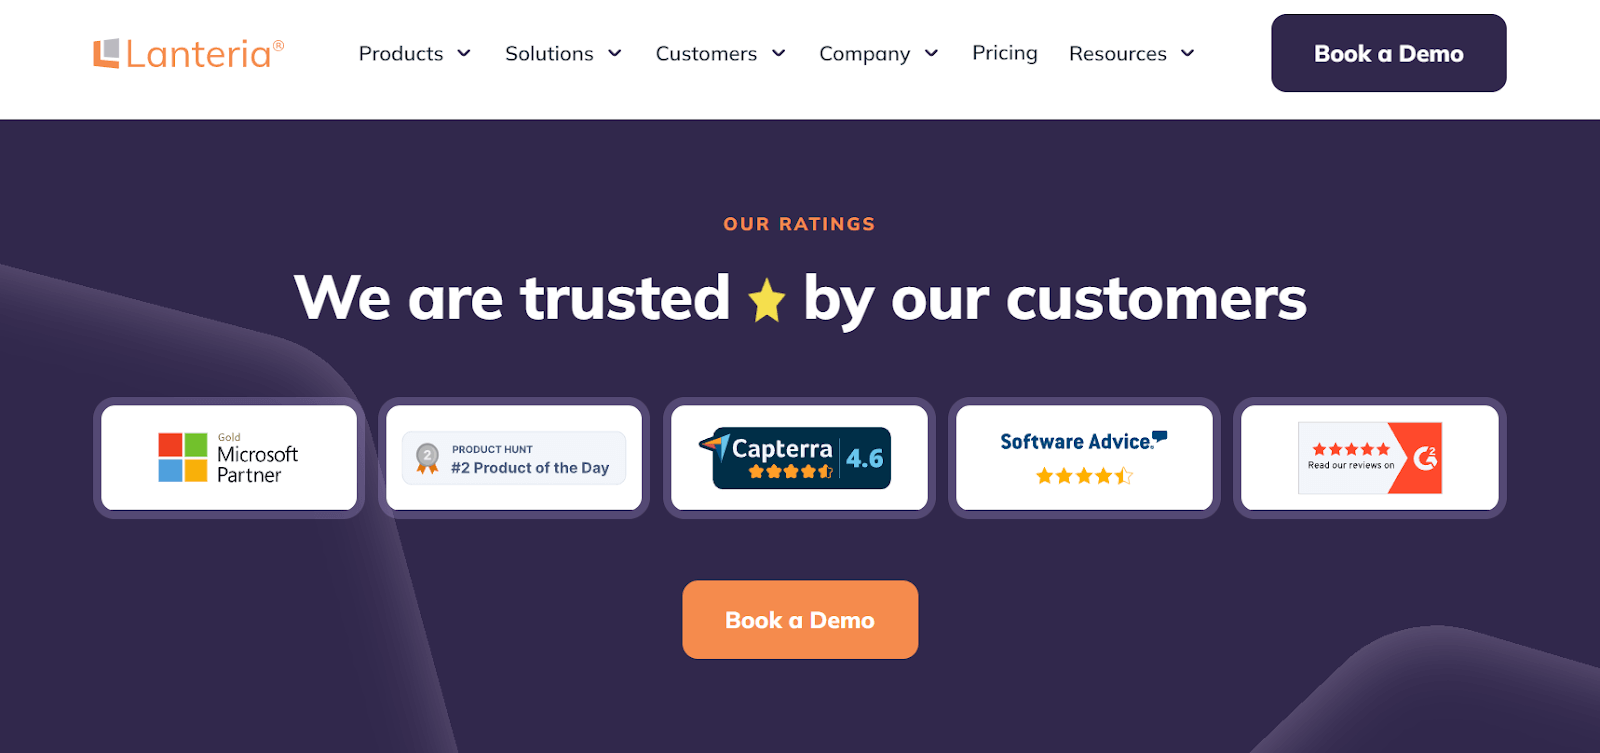 example of company featuring ratings and reviews on their homepage to build trust